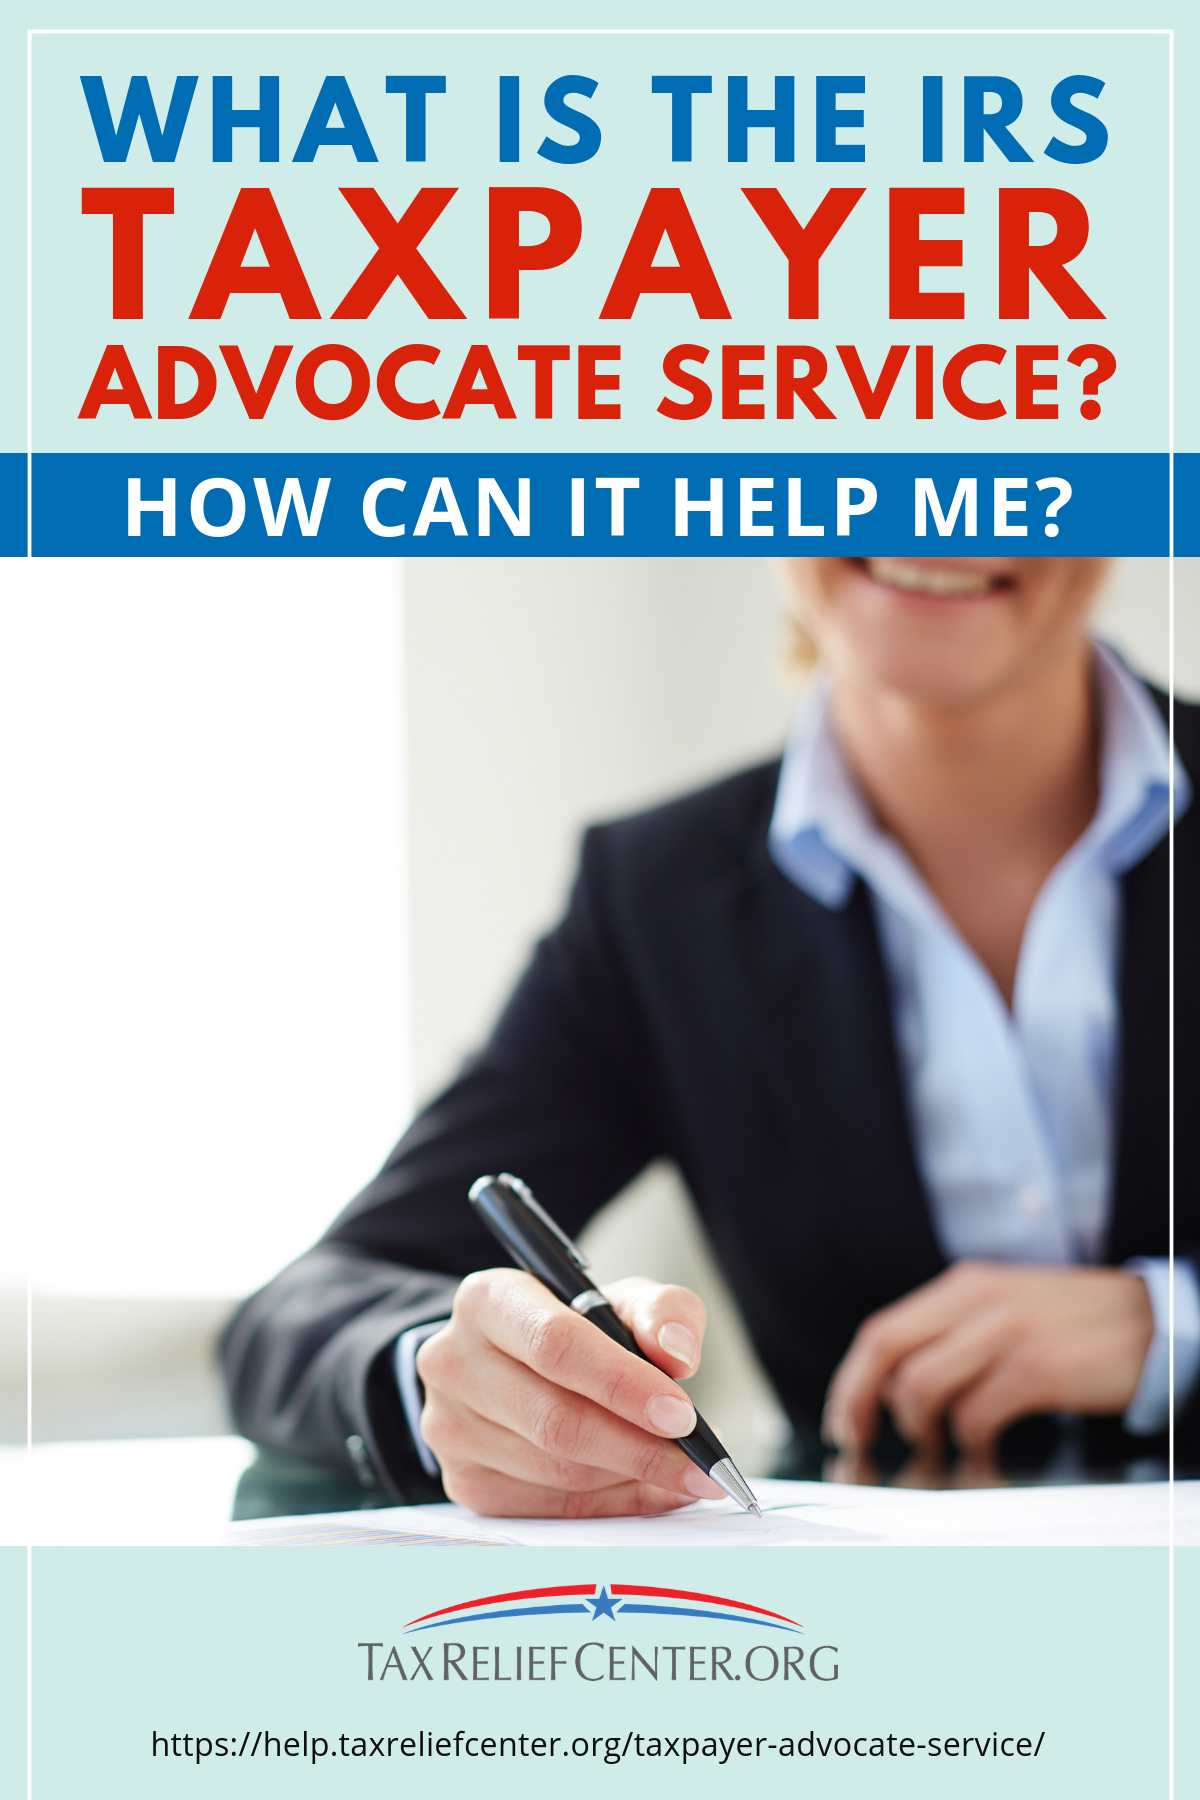 What Is The IRS Taxpayer Advocate Service And How Can It Help Me? https://help.taxreliefcenter.org/taxpayer-advocate-service/